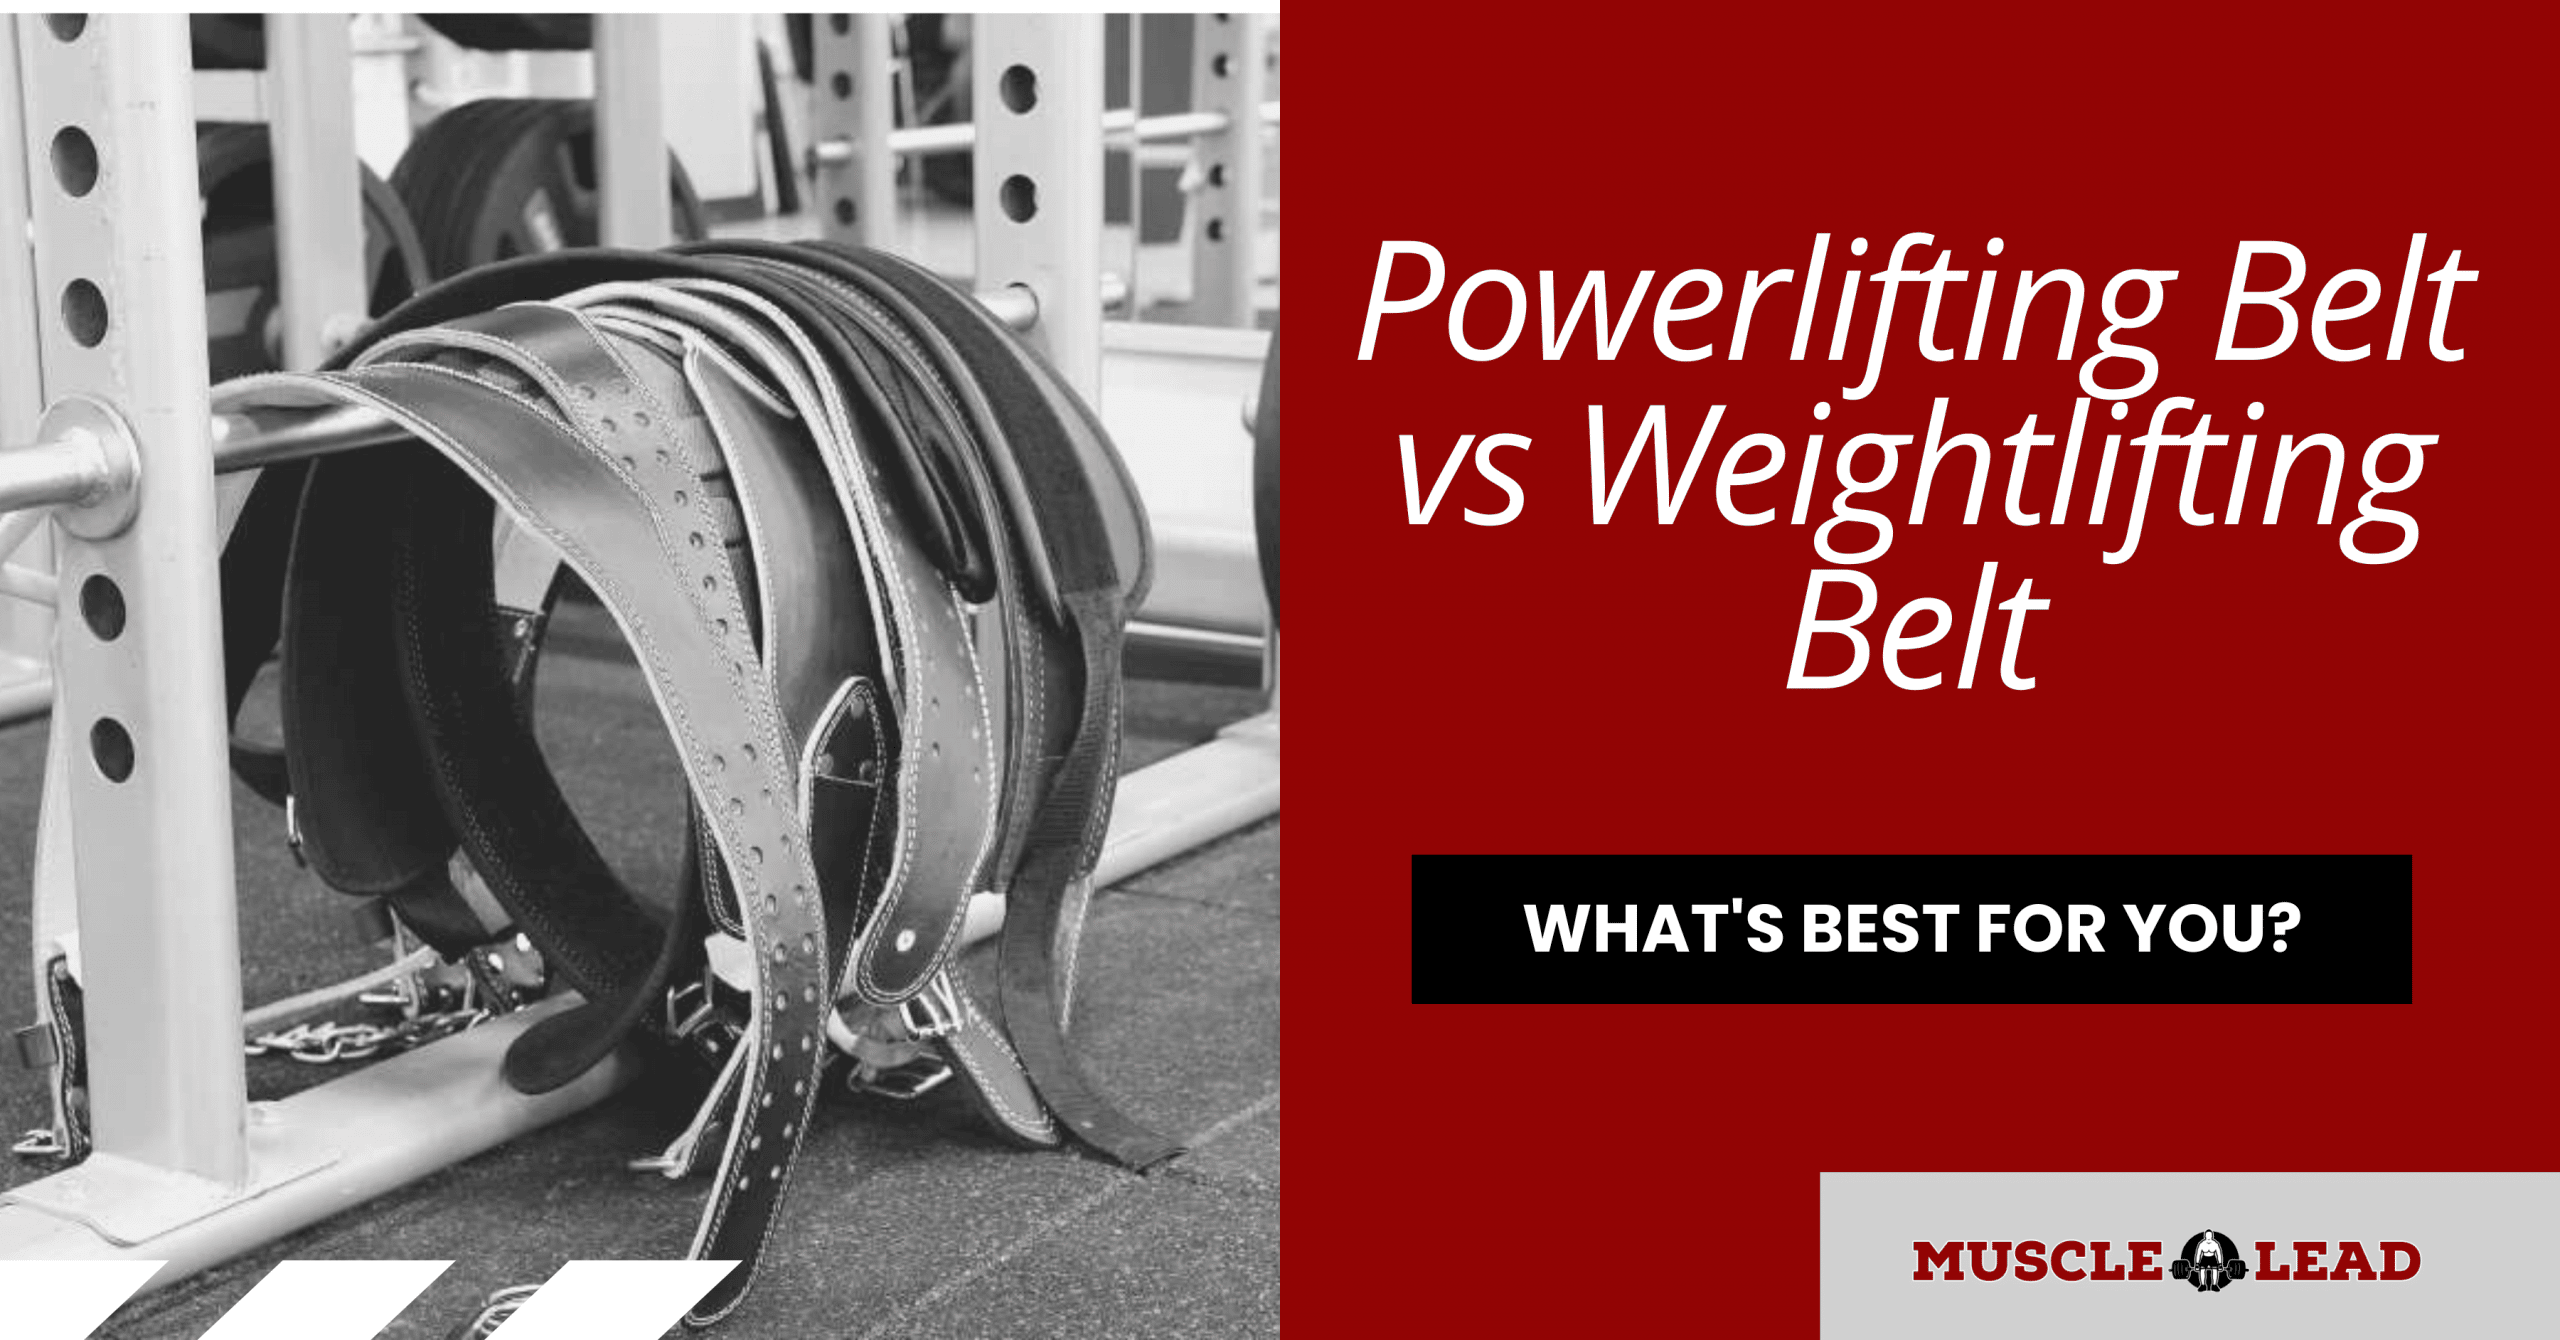 Powerlifting belt vs weightlifting belt differences and comparison